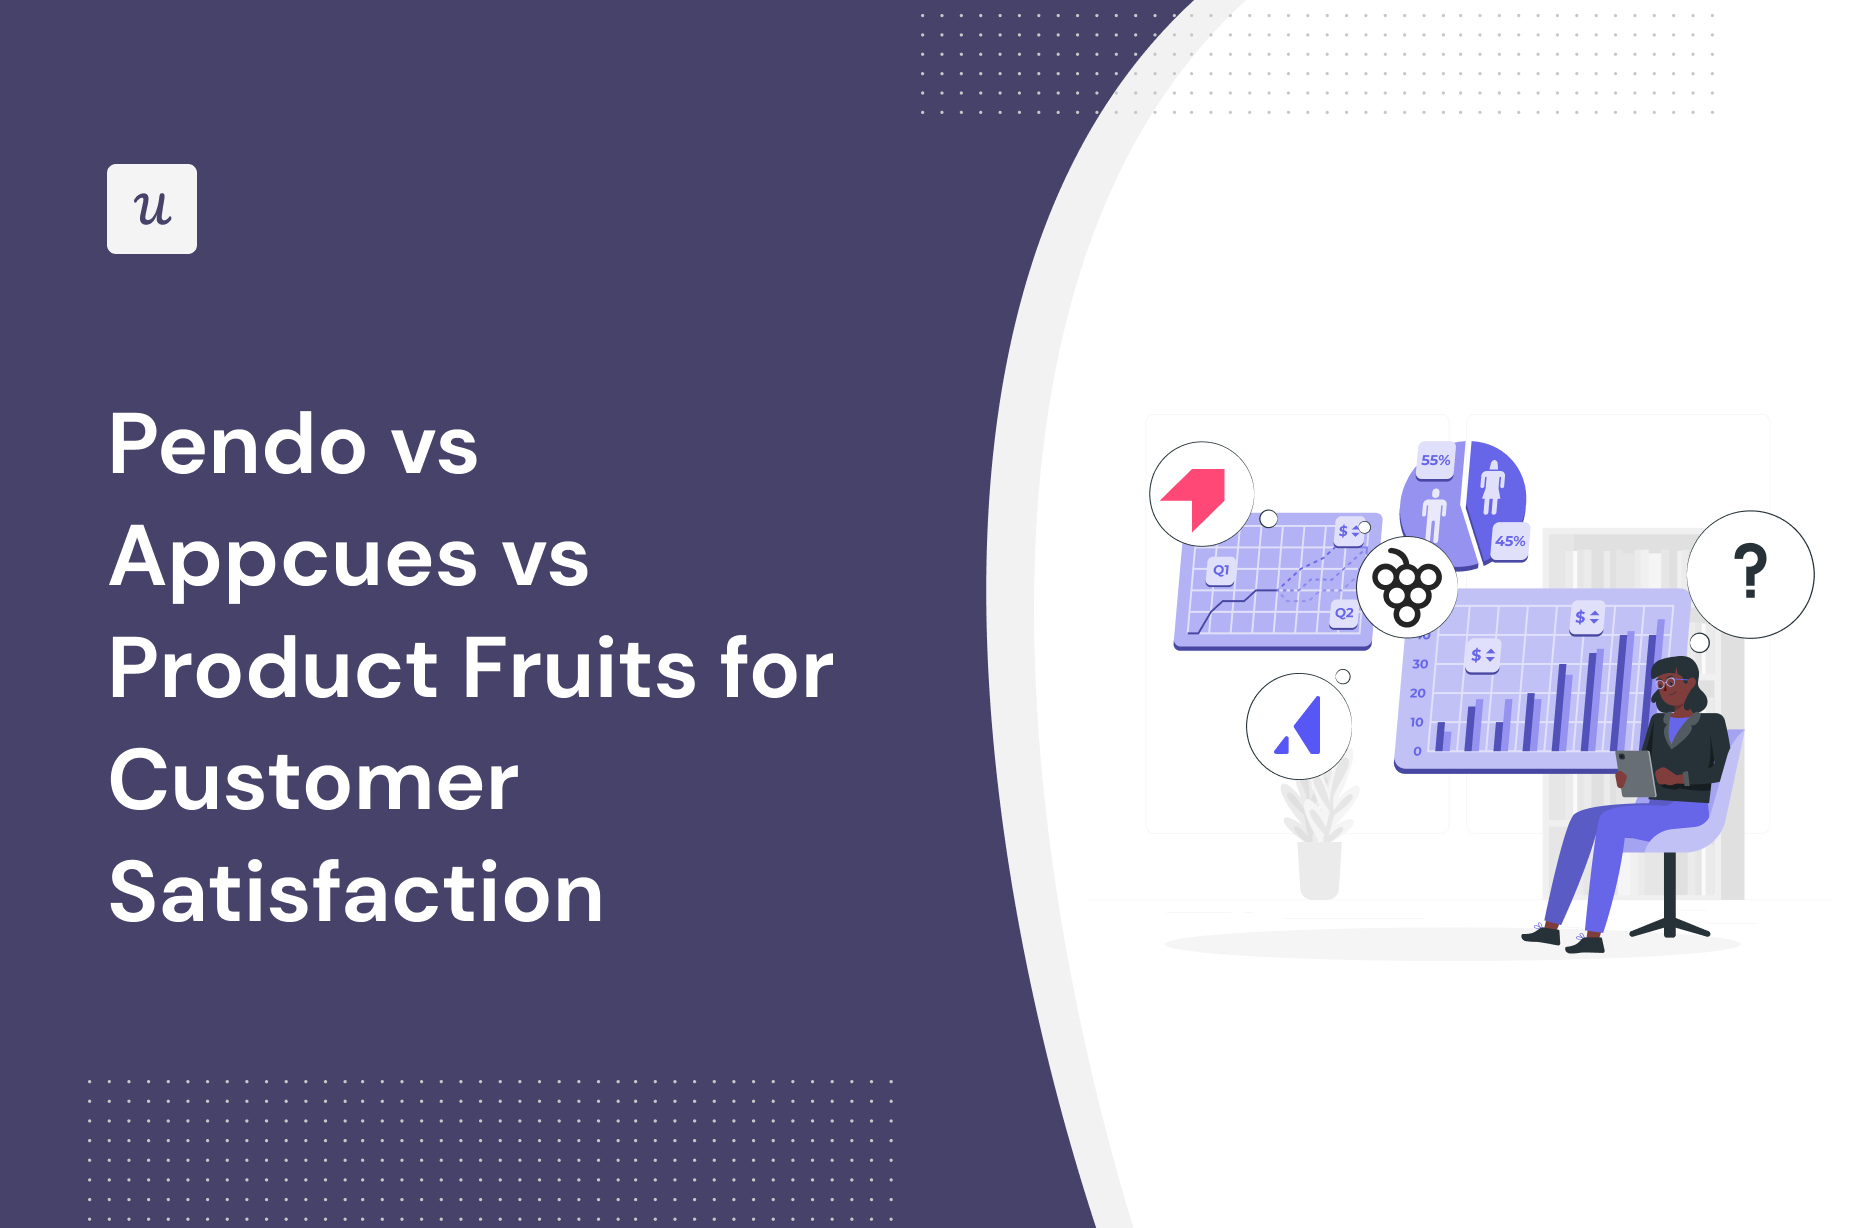 Pendo vs Appcues vs Product Fruits for Customer Satisfaction